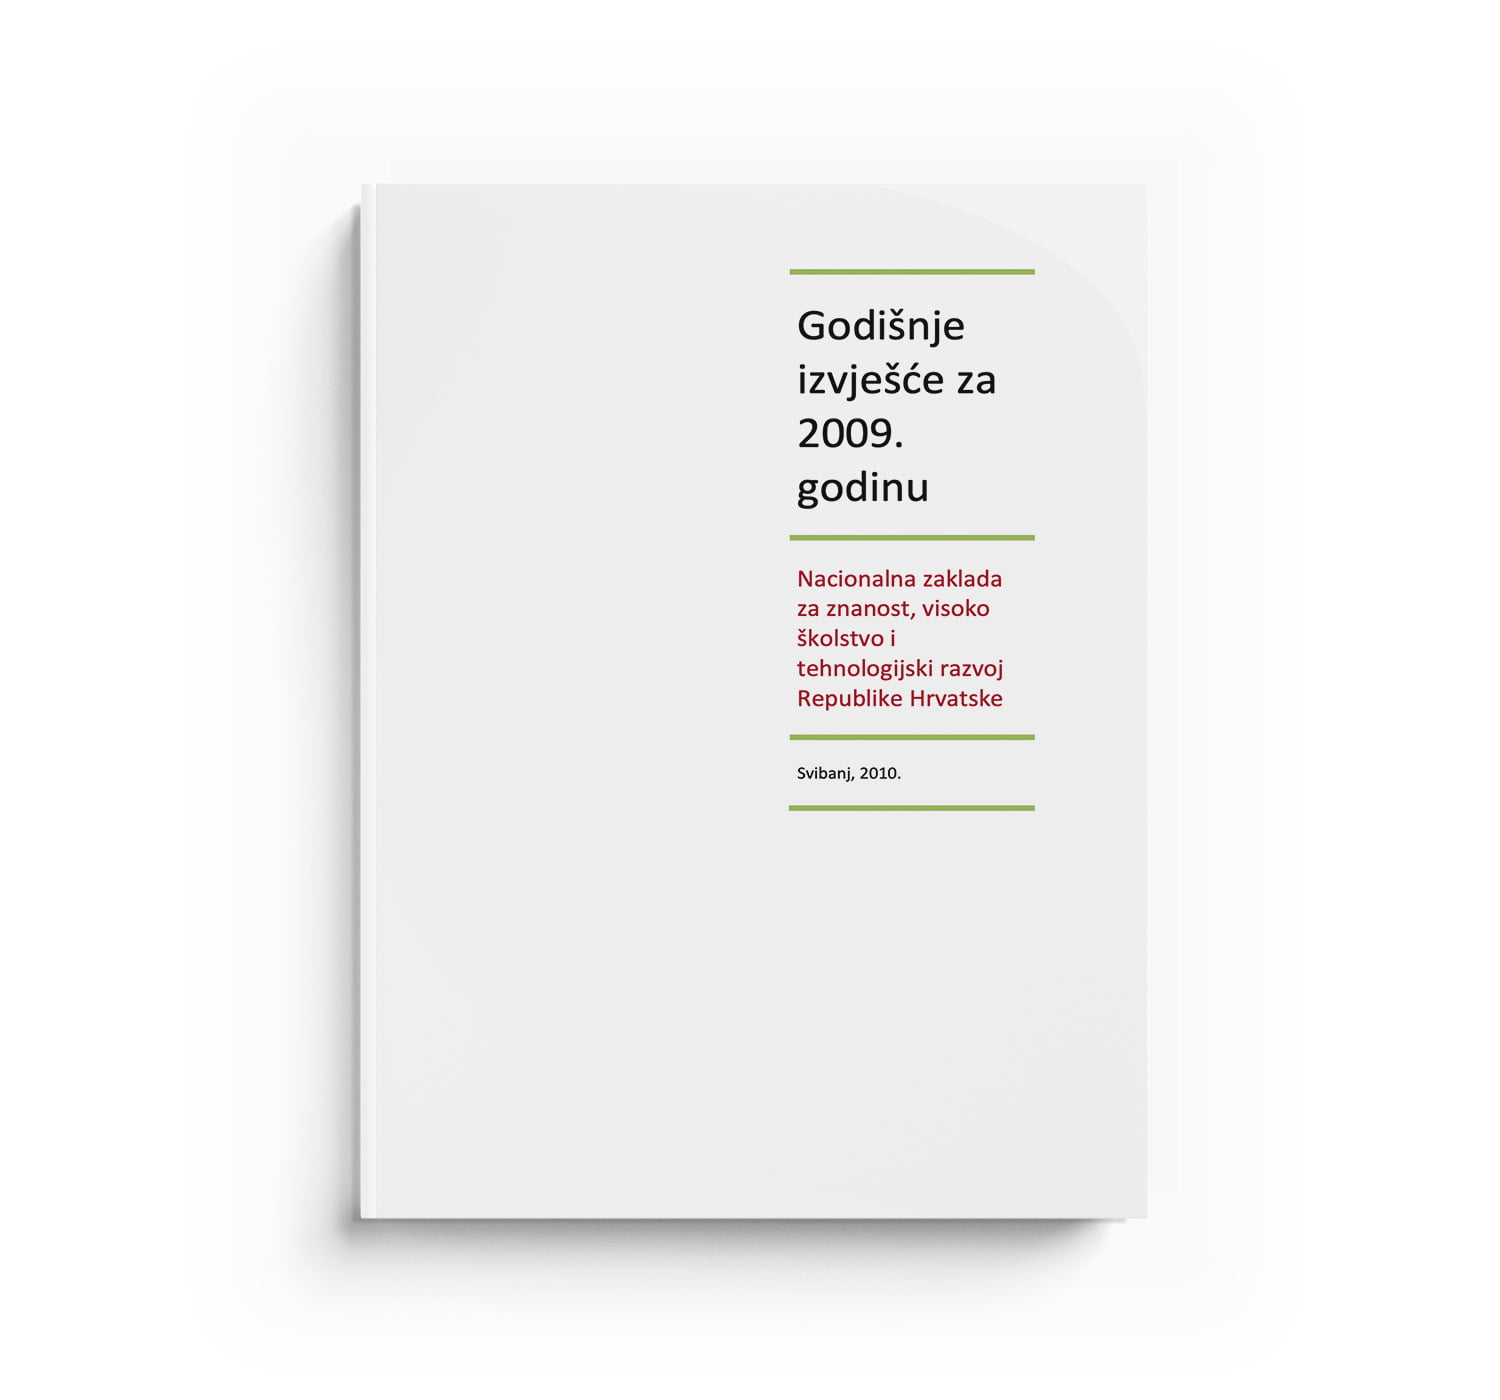 A mockup of a book cover on white surface